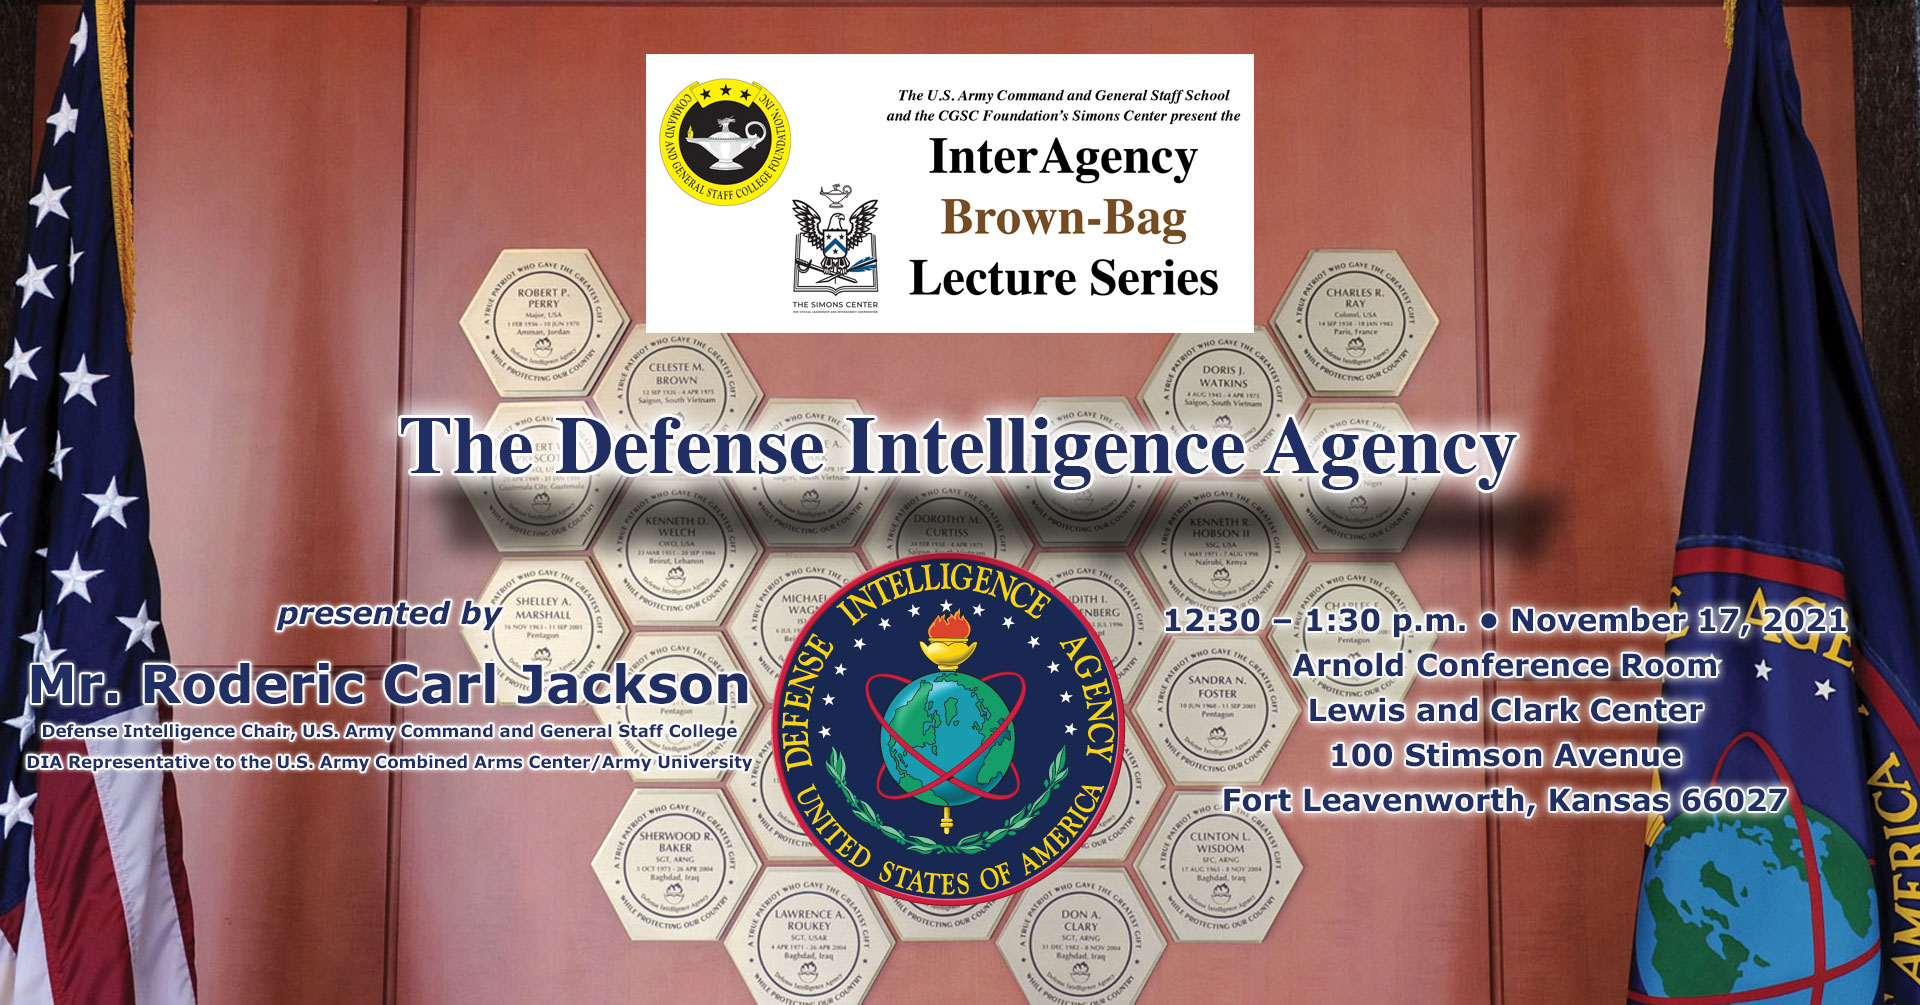 Composite image of the DIA Patriots Memorial Wall in the DIA headquarters with Interagency Brownbag Lecture information text over the photo. The next brown-bag lecture is focused on the DIA and will be presented by Roderic C. Jackson, the Defense Intelligence Chair and Defense Intelligence Agency (DIA) Representative to the Combined Arms Center and Army University, on Nov. 17, 2021 at 12:30 p.m. in the Arnold Conference Room of the Lewis and Clark Center.